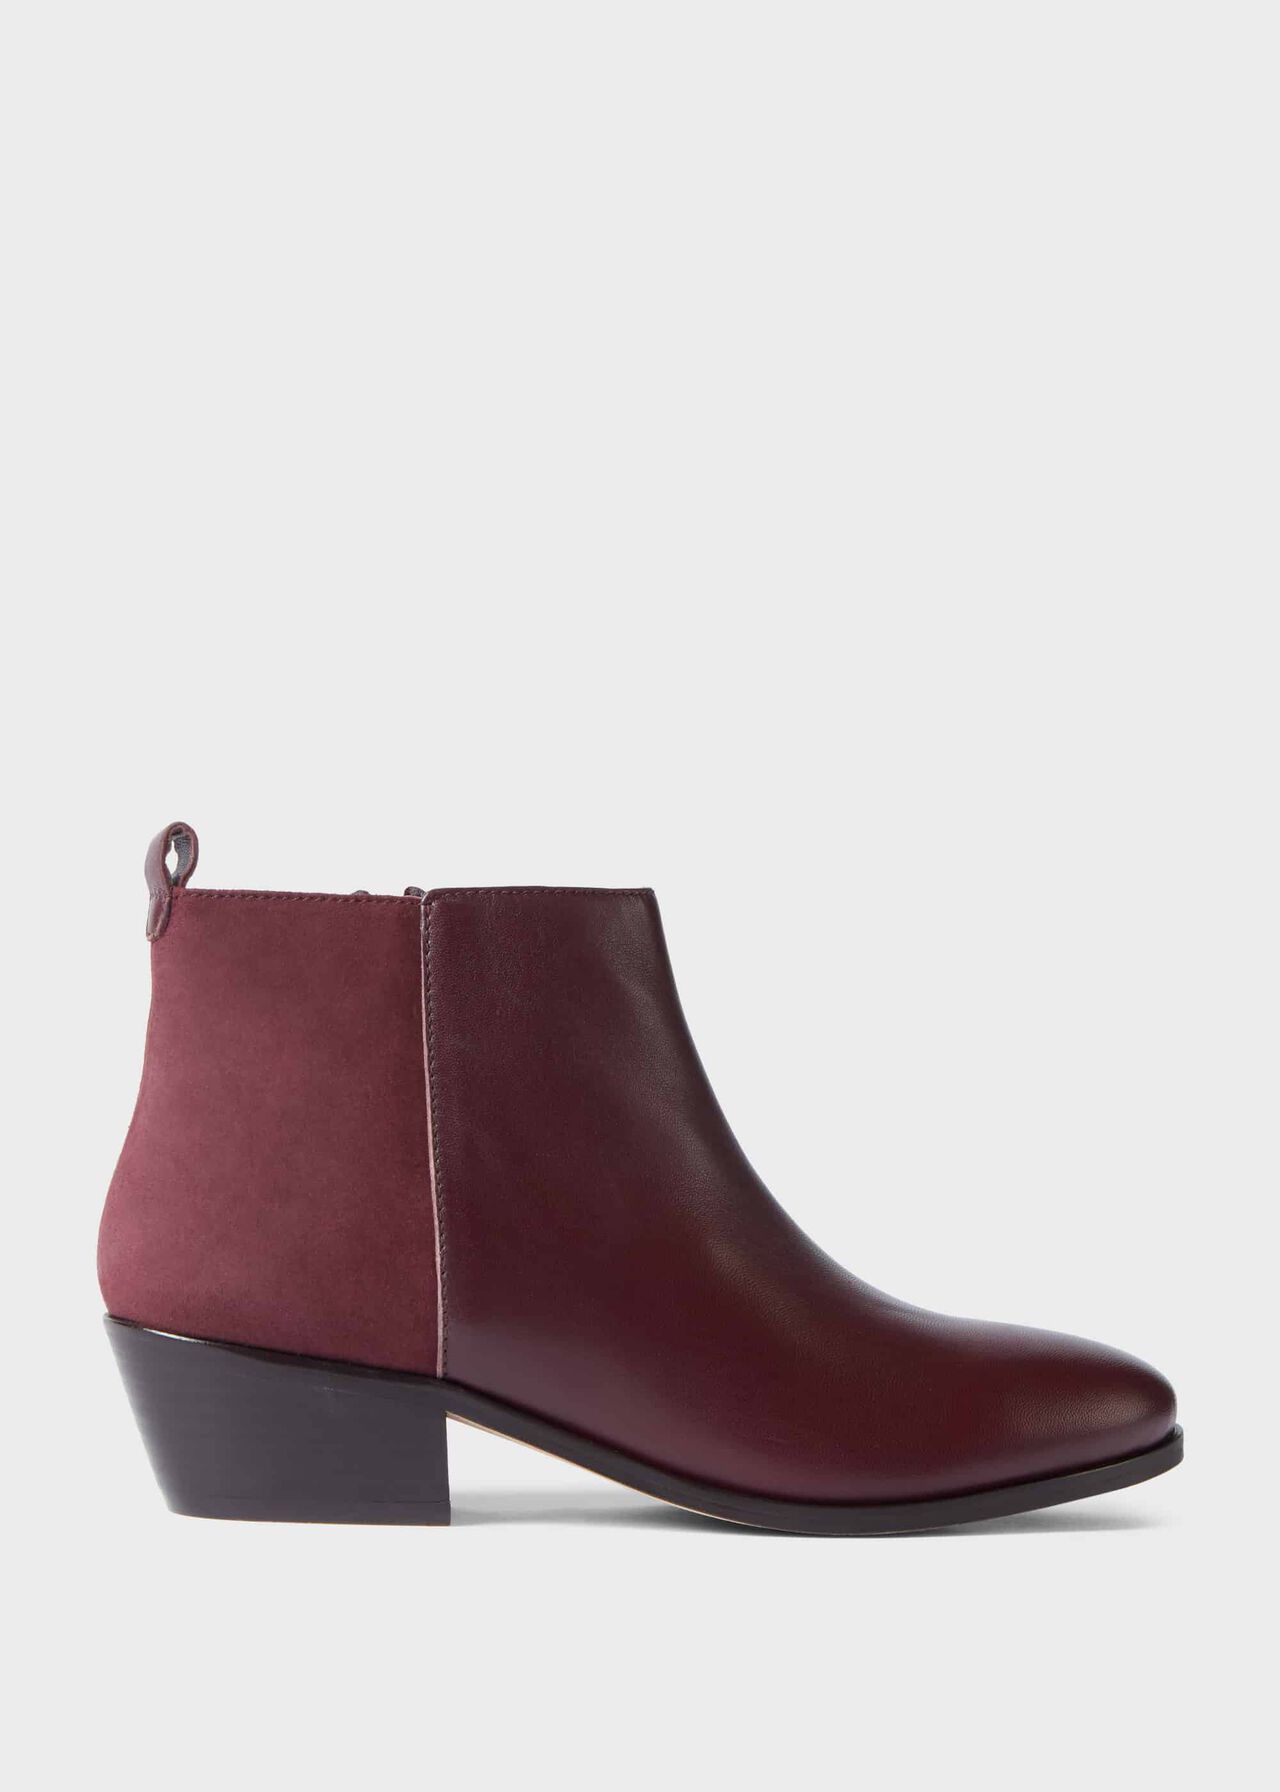 Alice Leather Ankle Boots, Wine, hi-res